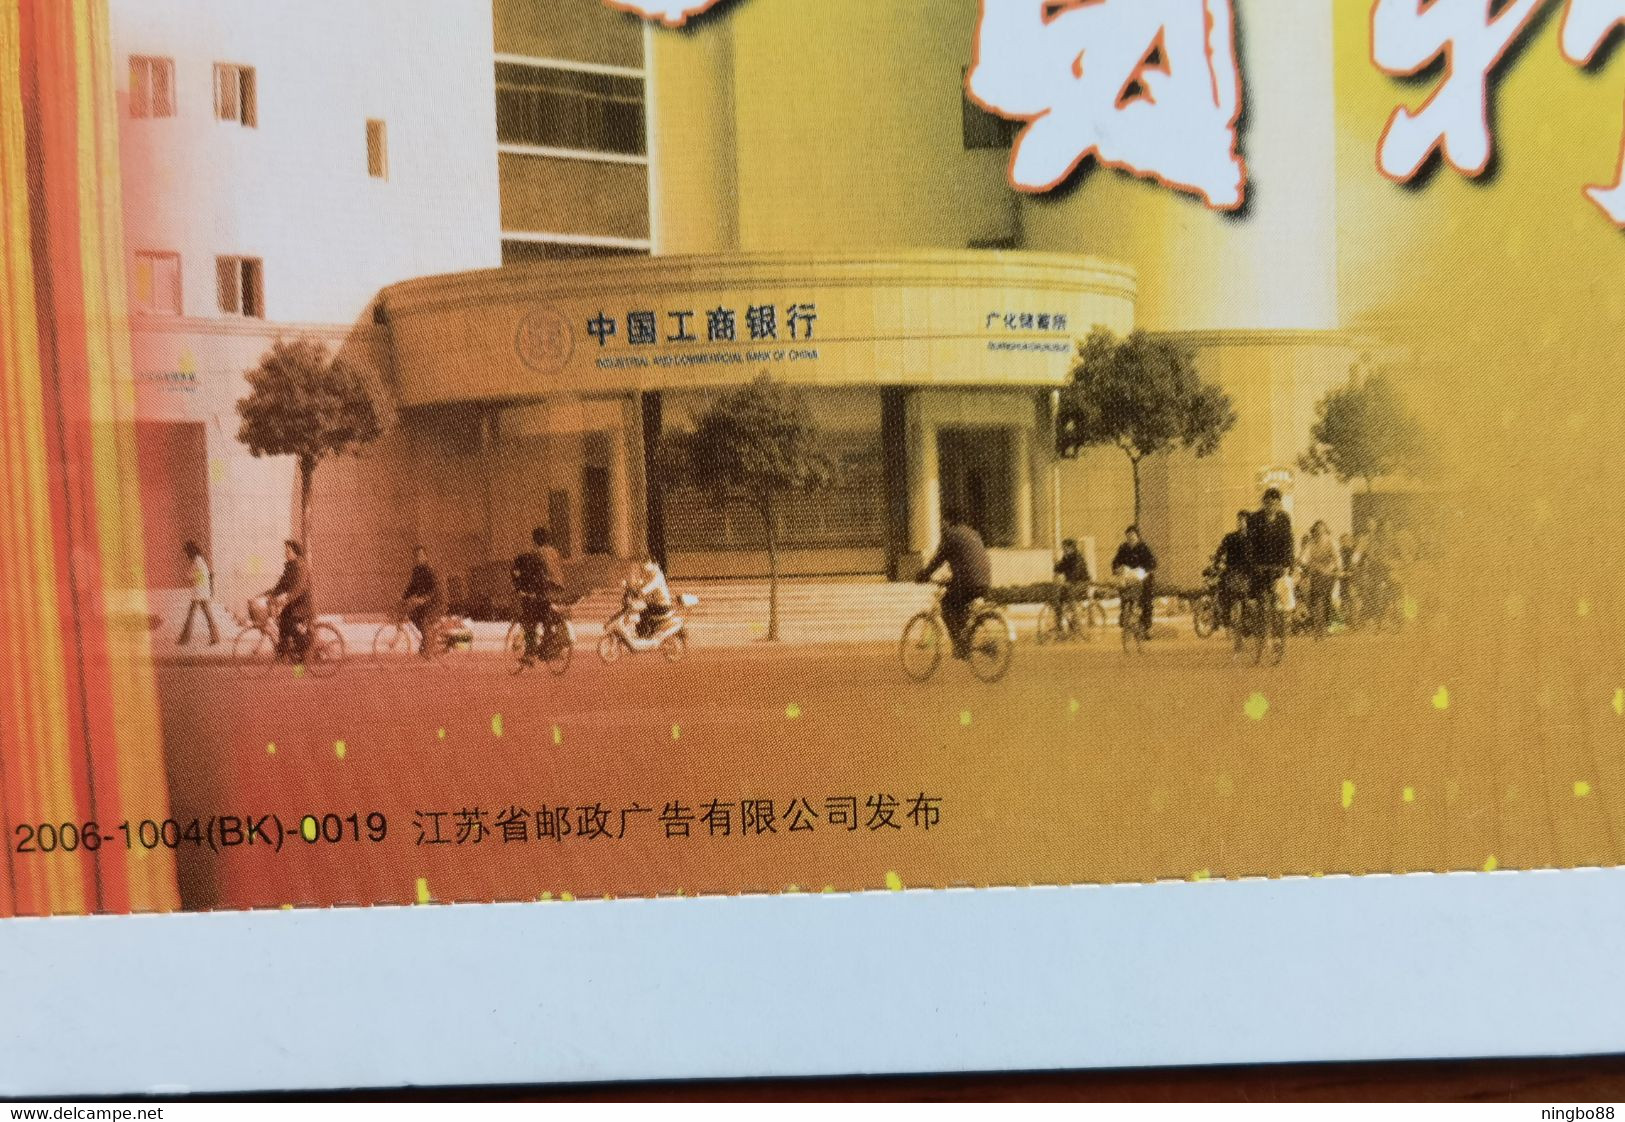 Bicycle Cycling,bike,China 2006 Industrial & Commercial Bank Guanghua Branch New Year Greeting Pre-stamped Letter Card - Wielrennen